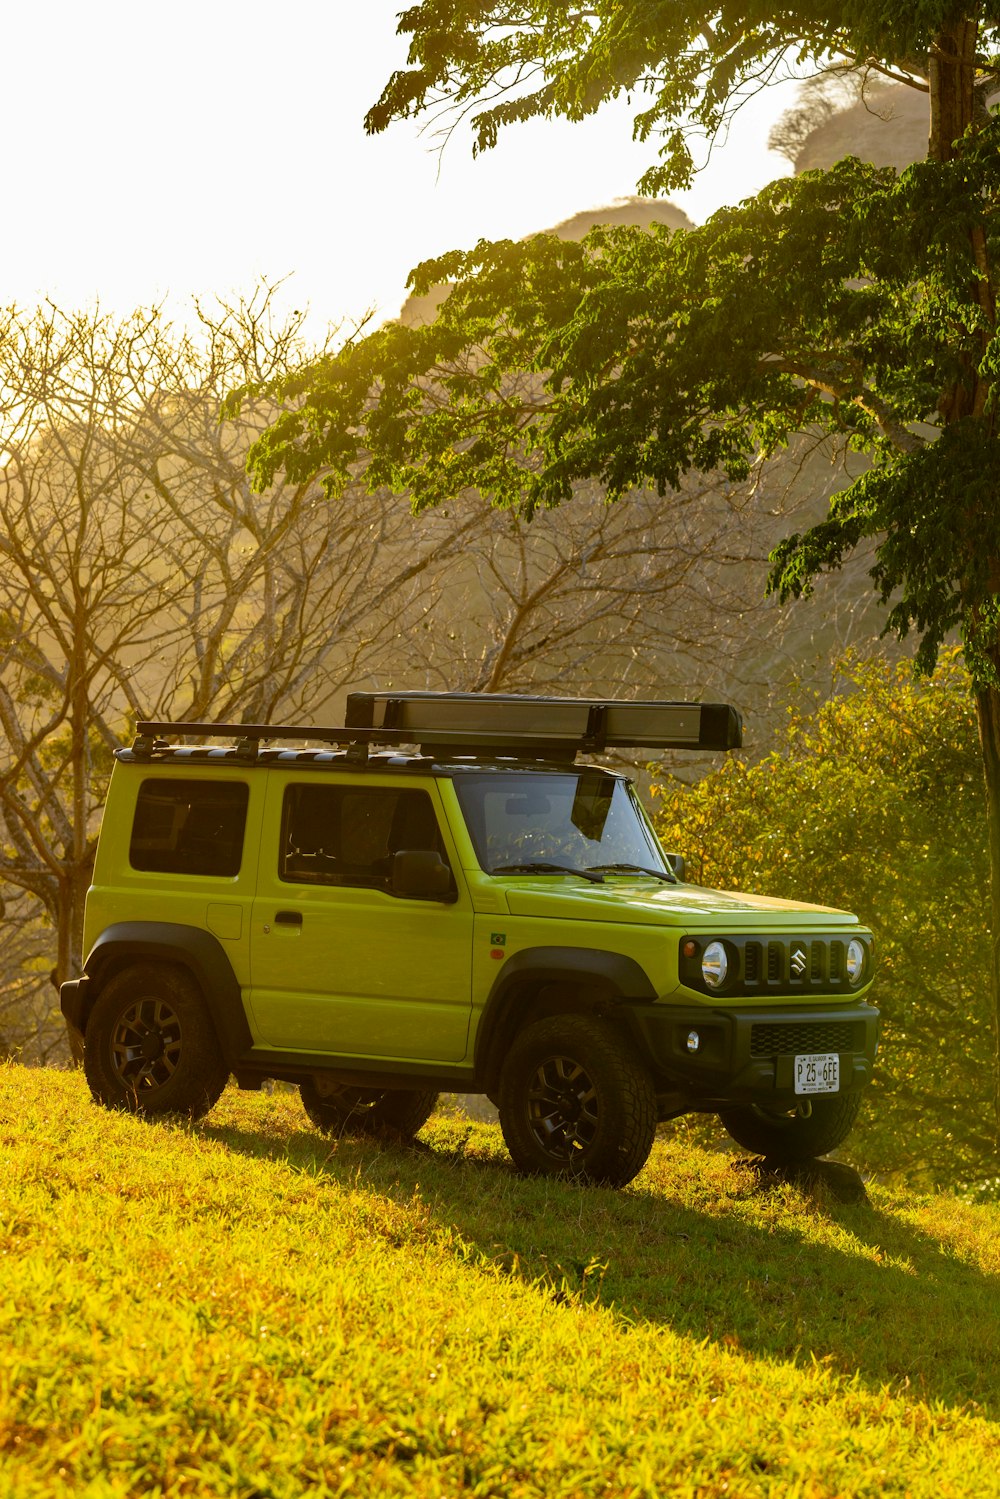 a green jeep parked in a grassy field